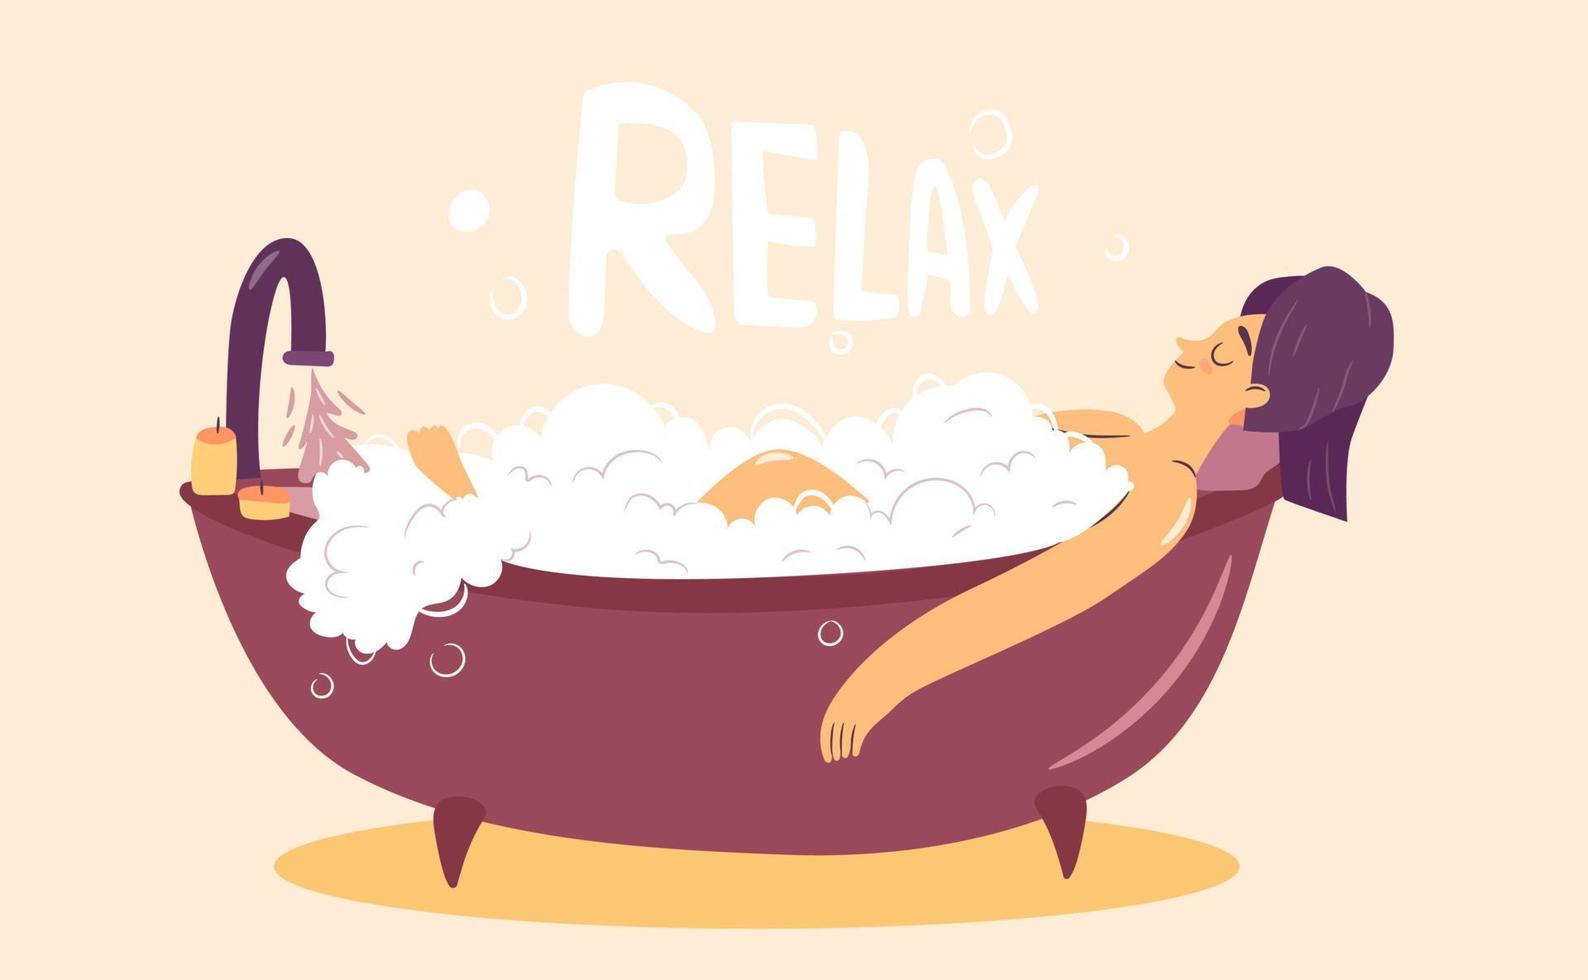 Selfcare relax time. Happy girl taking a bubble bath with candles. Isolated cartoon character illustration. Flat vector design.